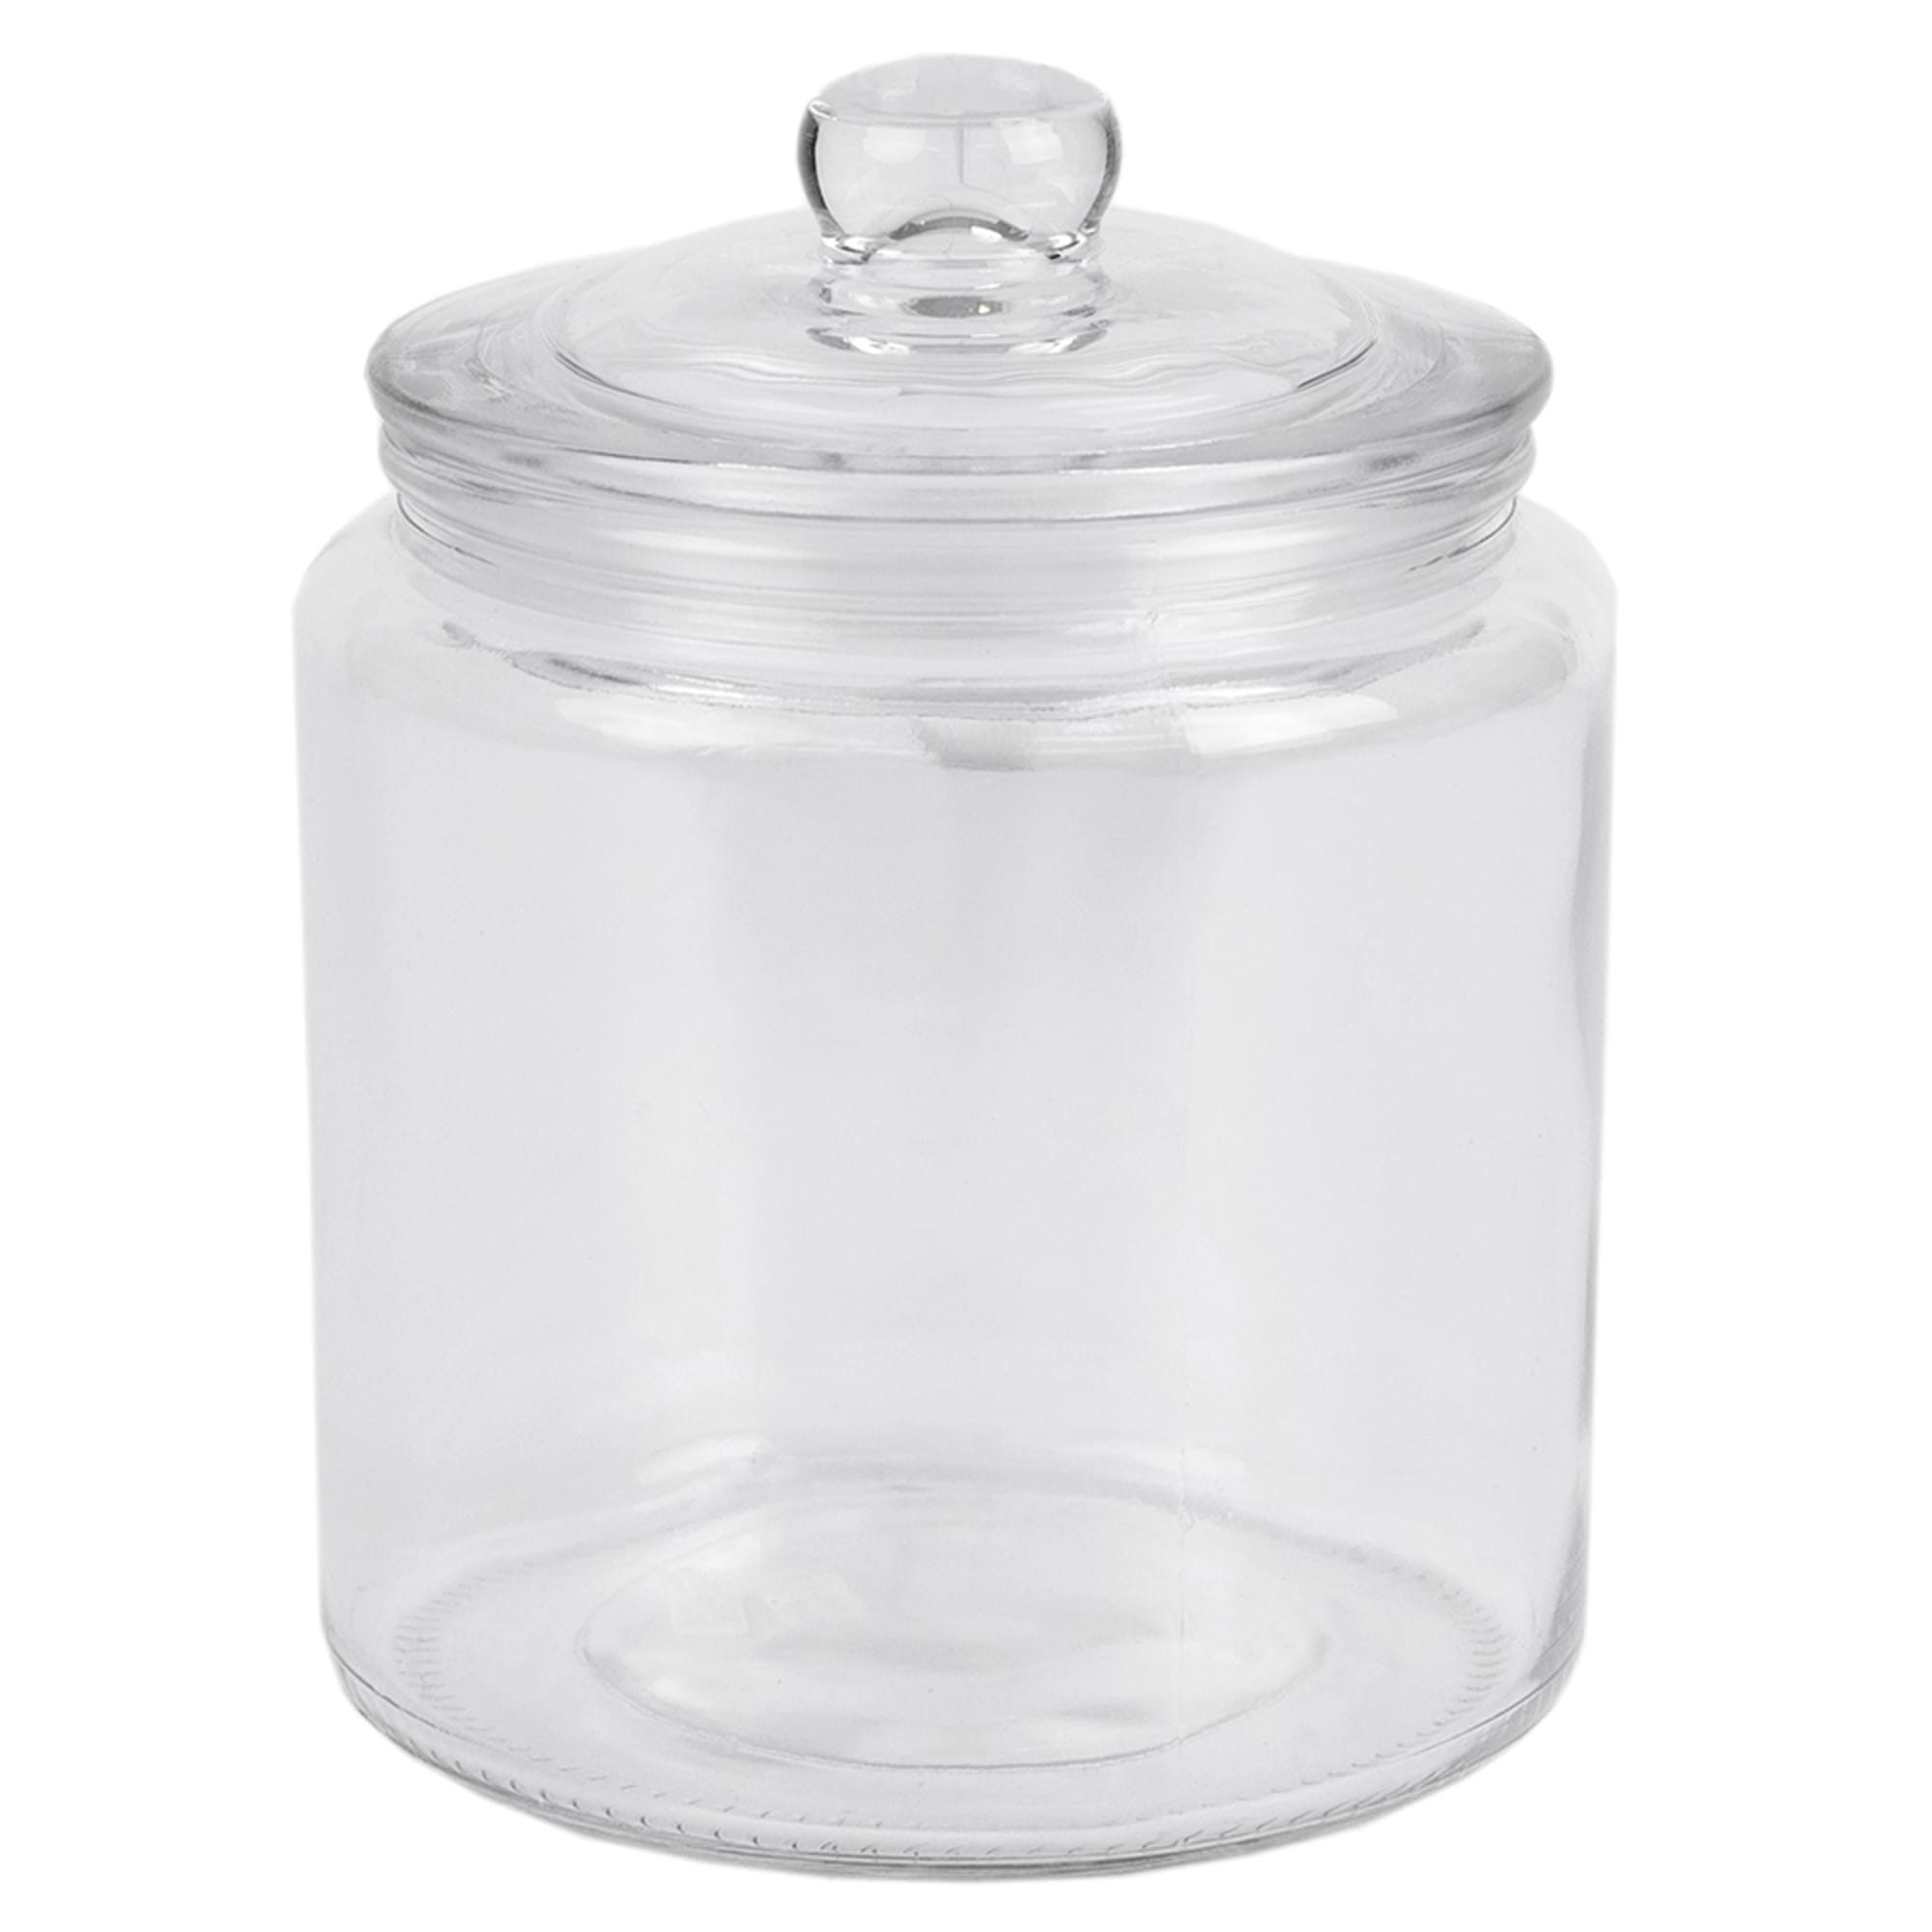 Home Basics Renaissance Collection Small 1 Lt Glass Jar with Easy Grab Knob Handles, Clear $4.00 EACH, CASE PACK OF 6